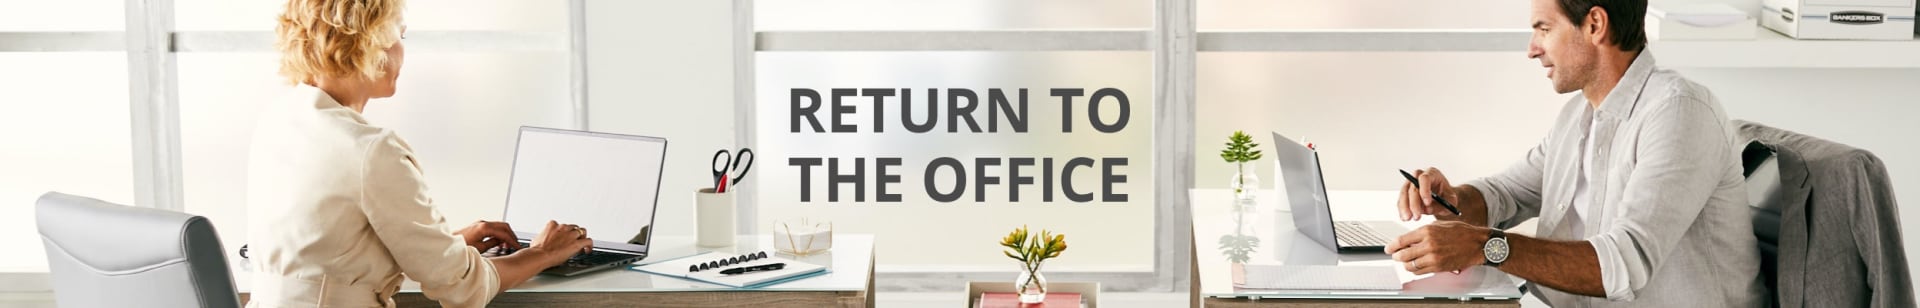 Return to the Office